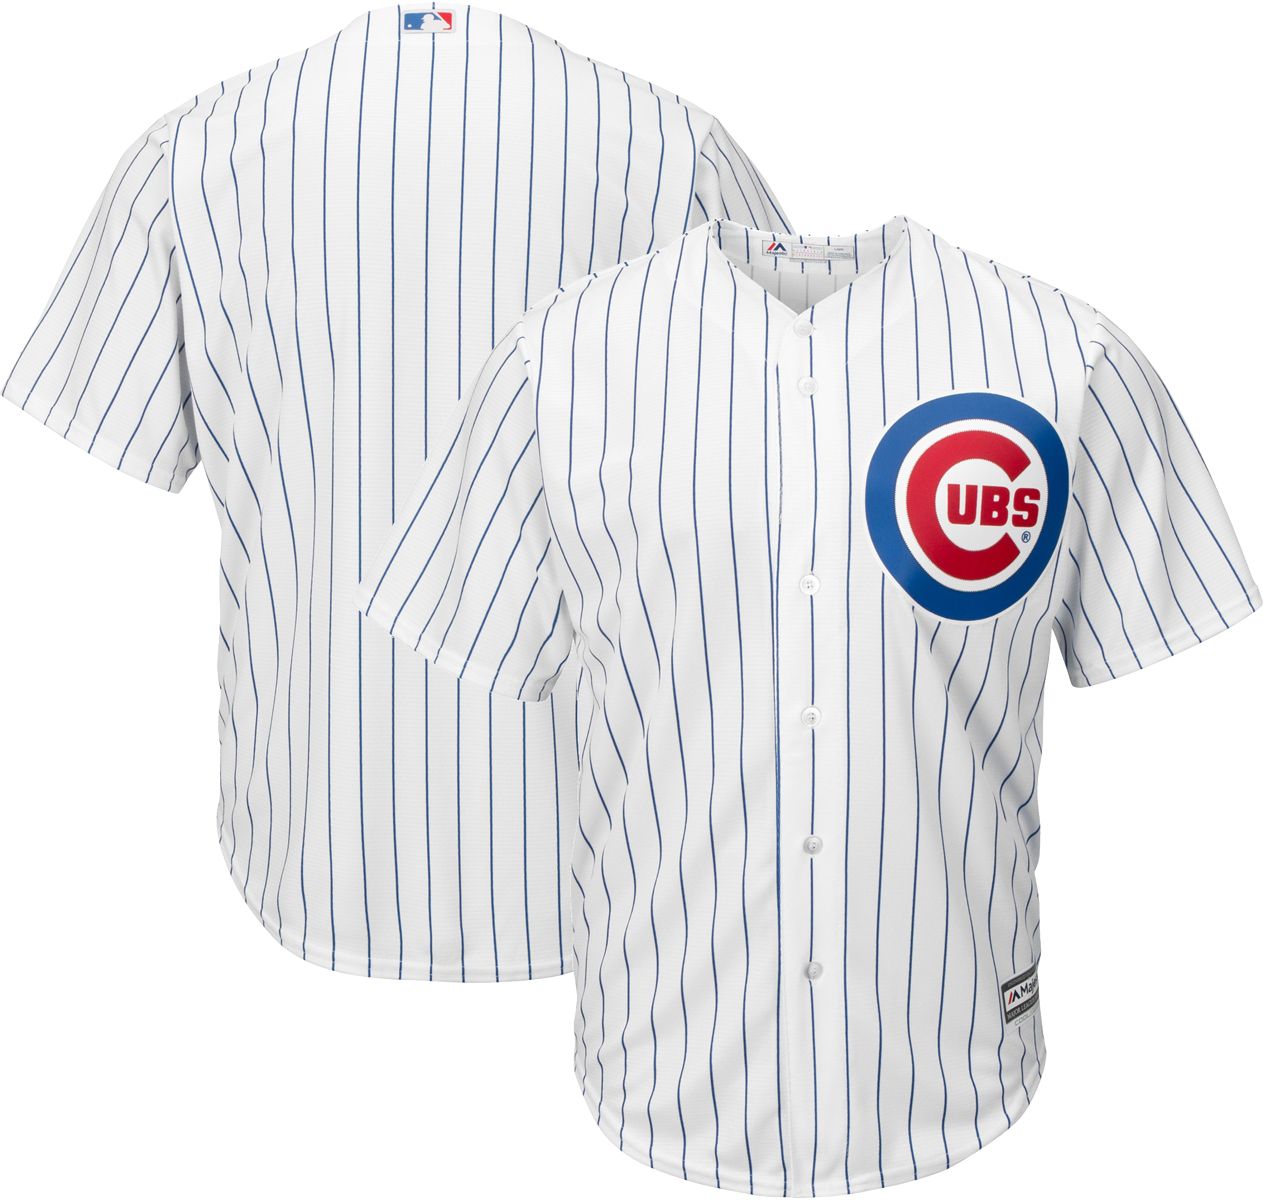 chicago cubs white jersey